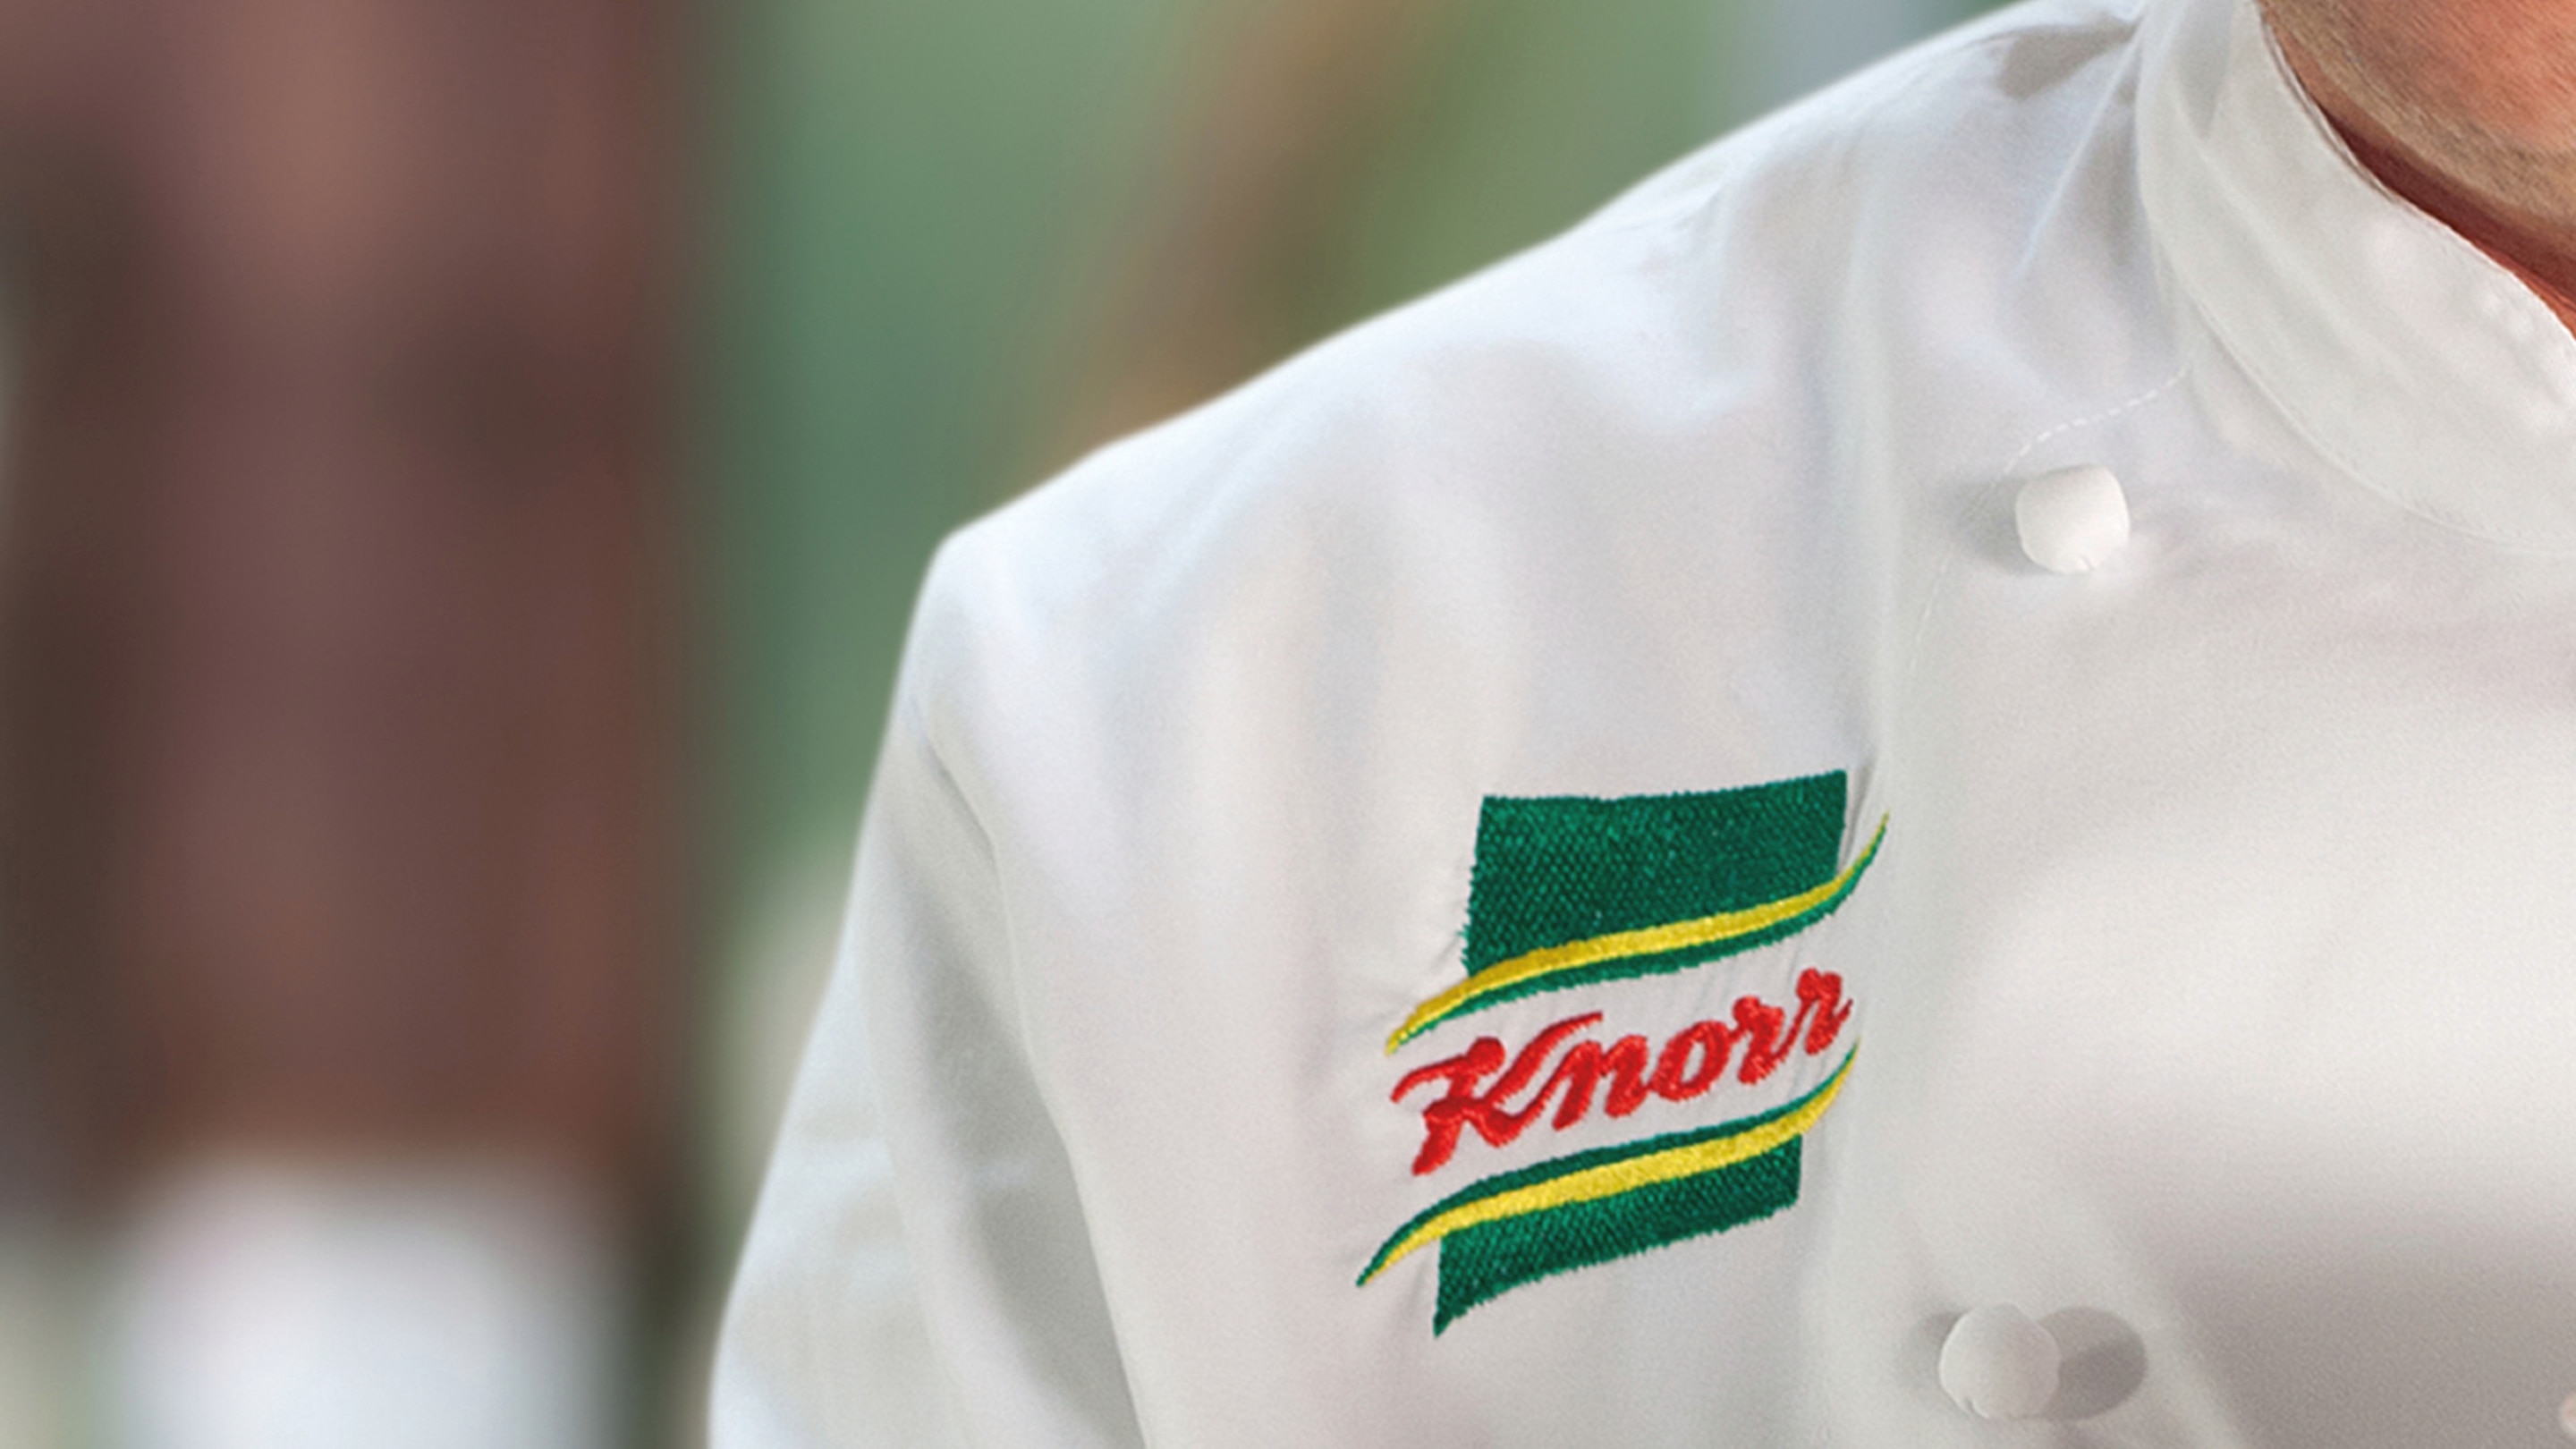 Close-up of an embroidered Knorr logo on a chef's jacket